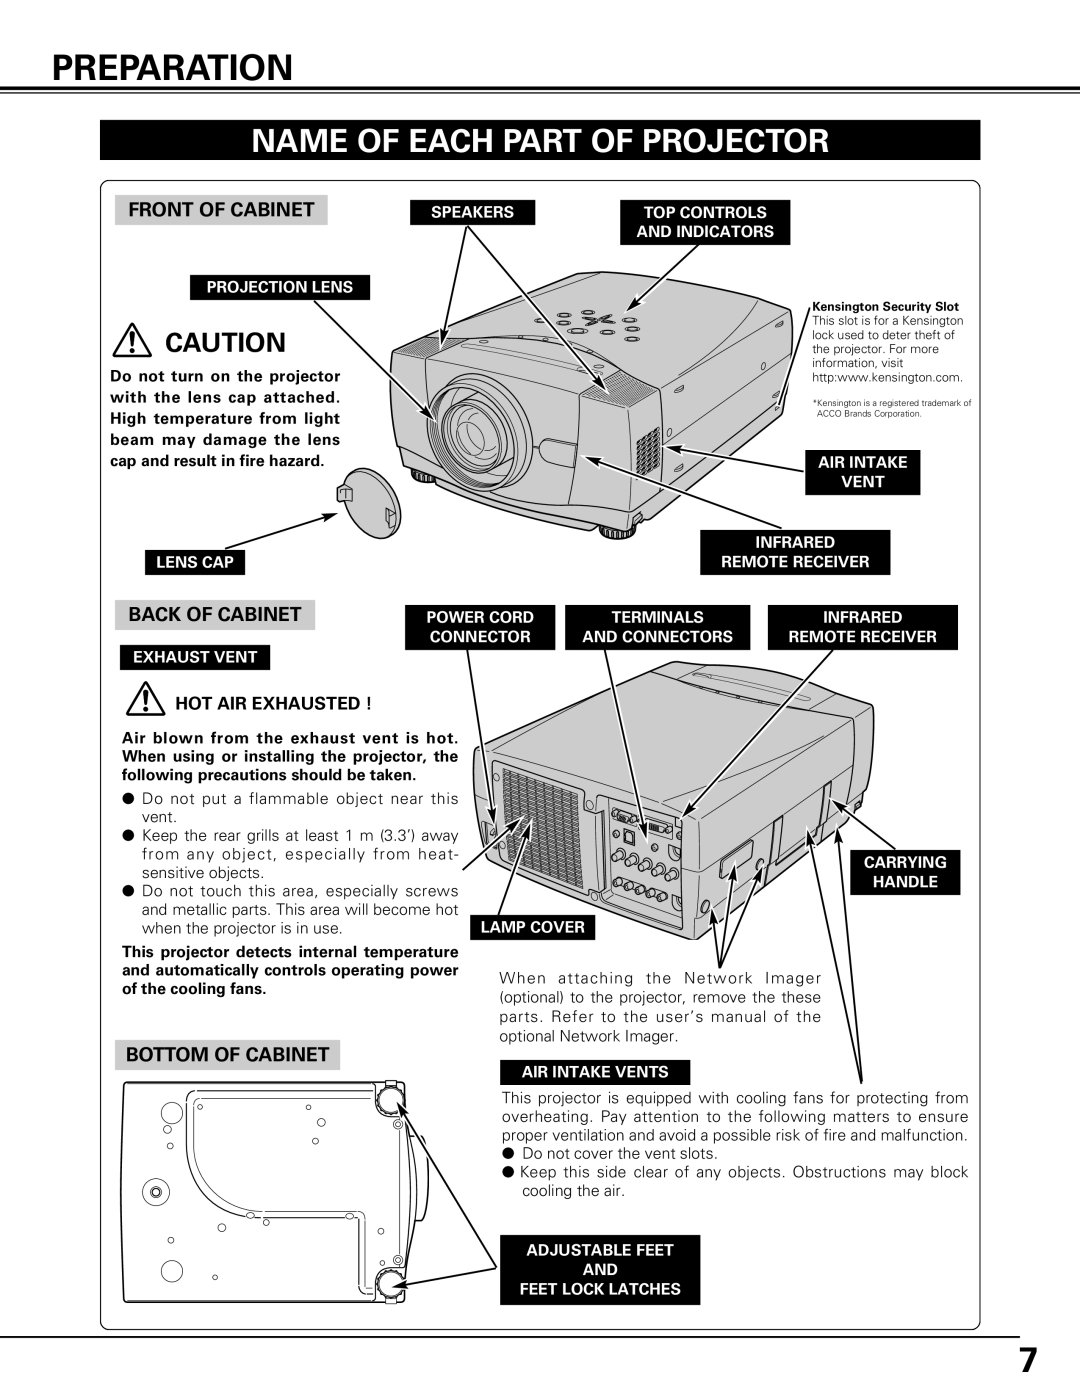 Canon LV-7575 user manual Preparation, Name Of Each Part Of Projector, Front Of Cabinet, Back Of Cabinet, Bottom Of Cabinet 